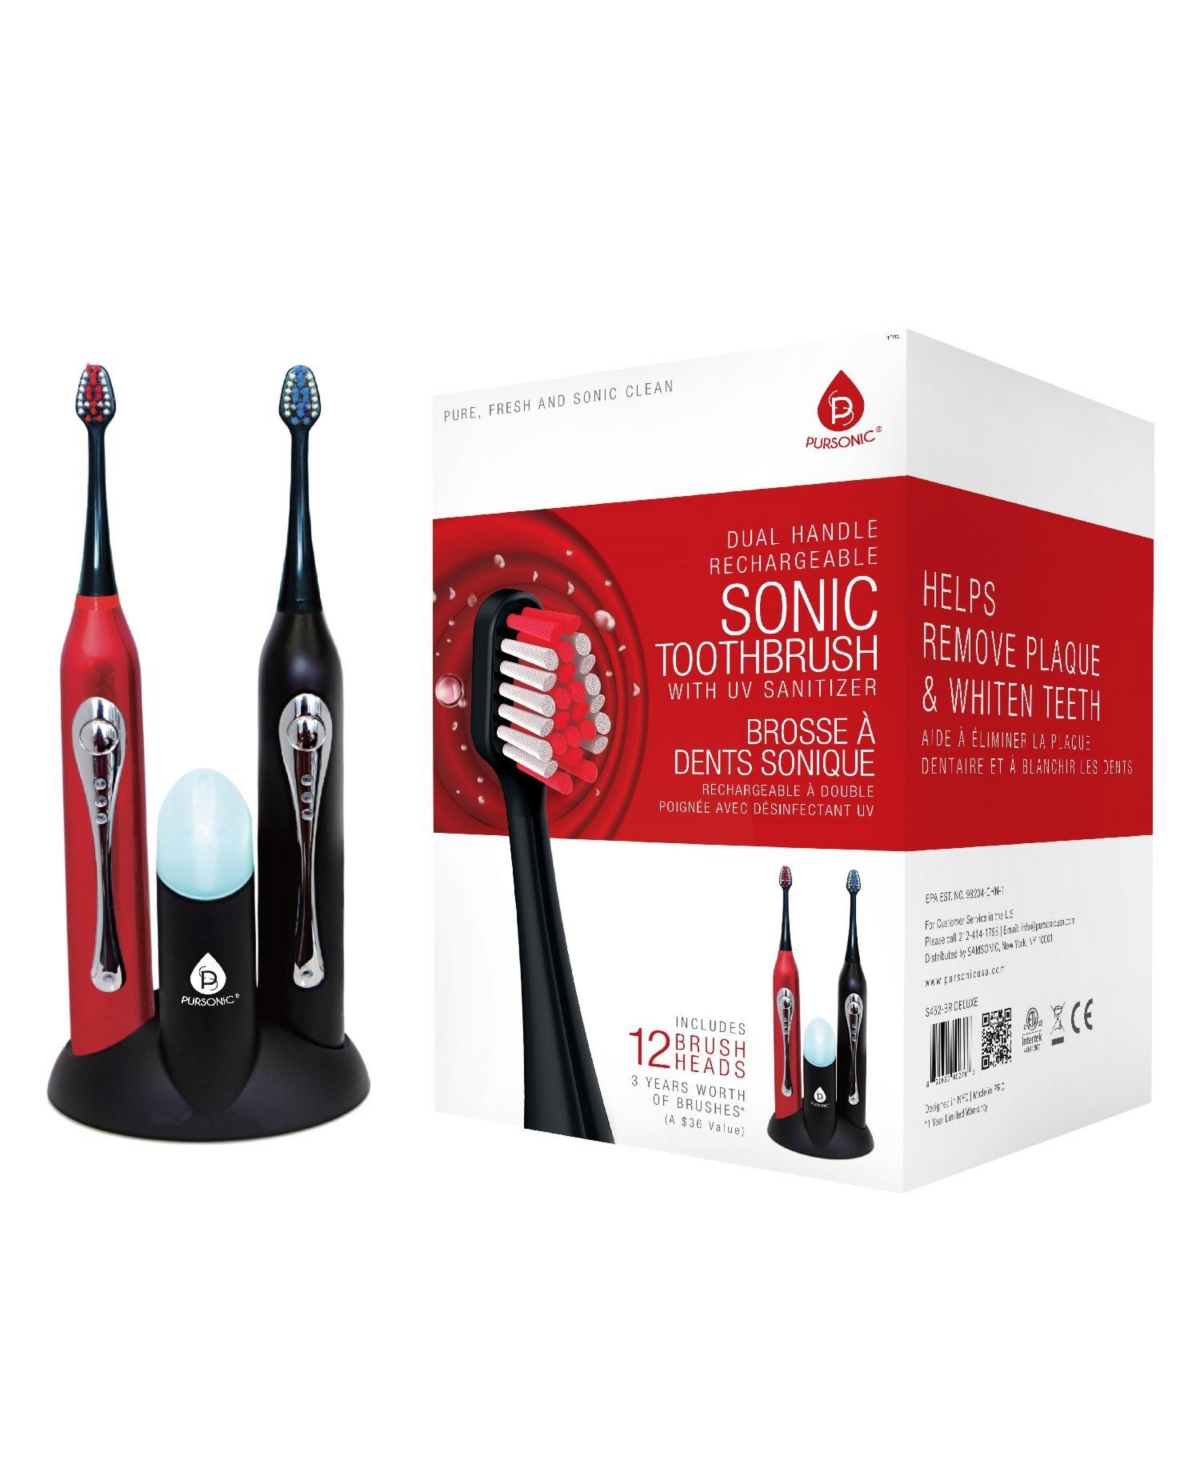 Pursonic Dual Handle Sonic Toothbrush With Uv Sanitizer In Red